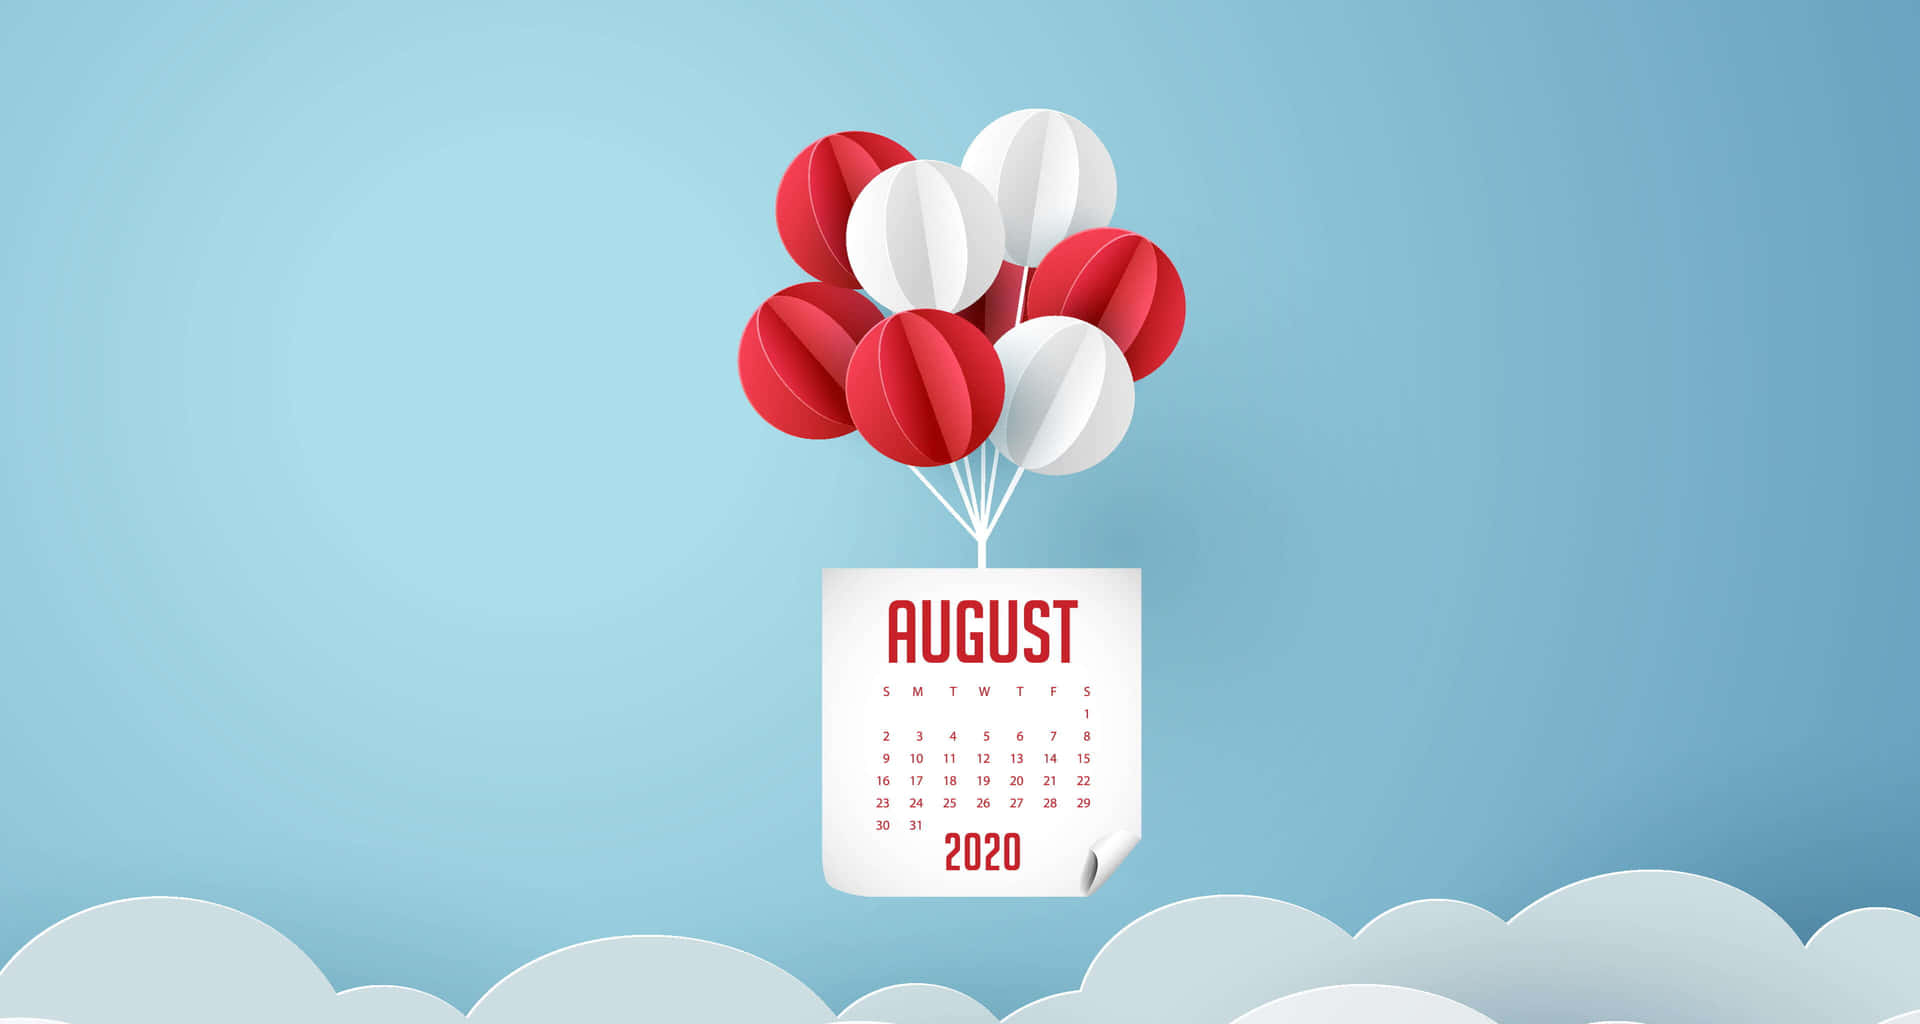 Make the most of the beautiful month of August